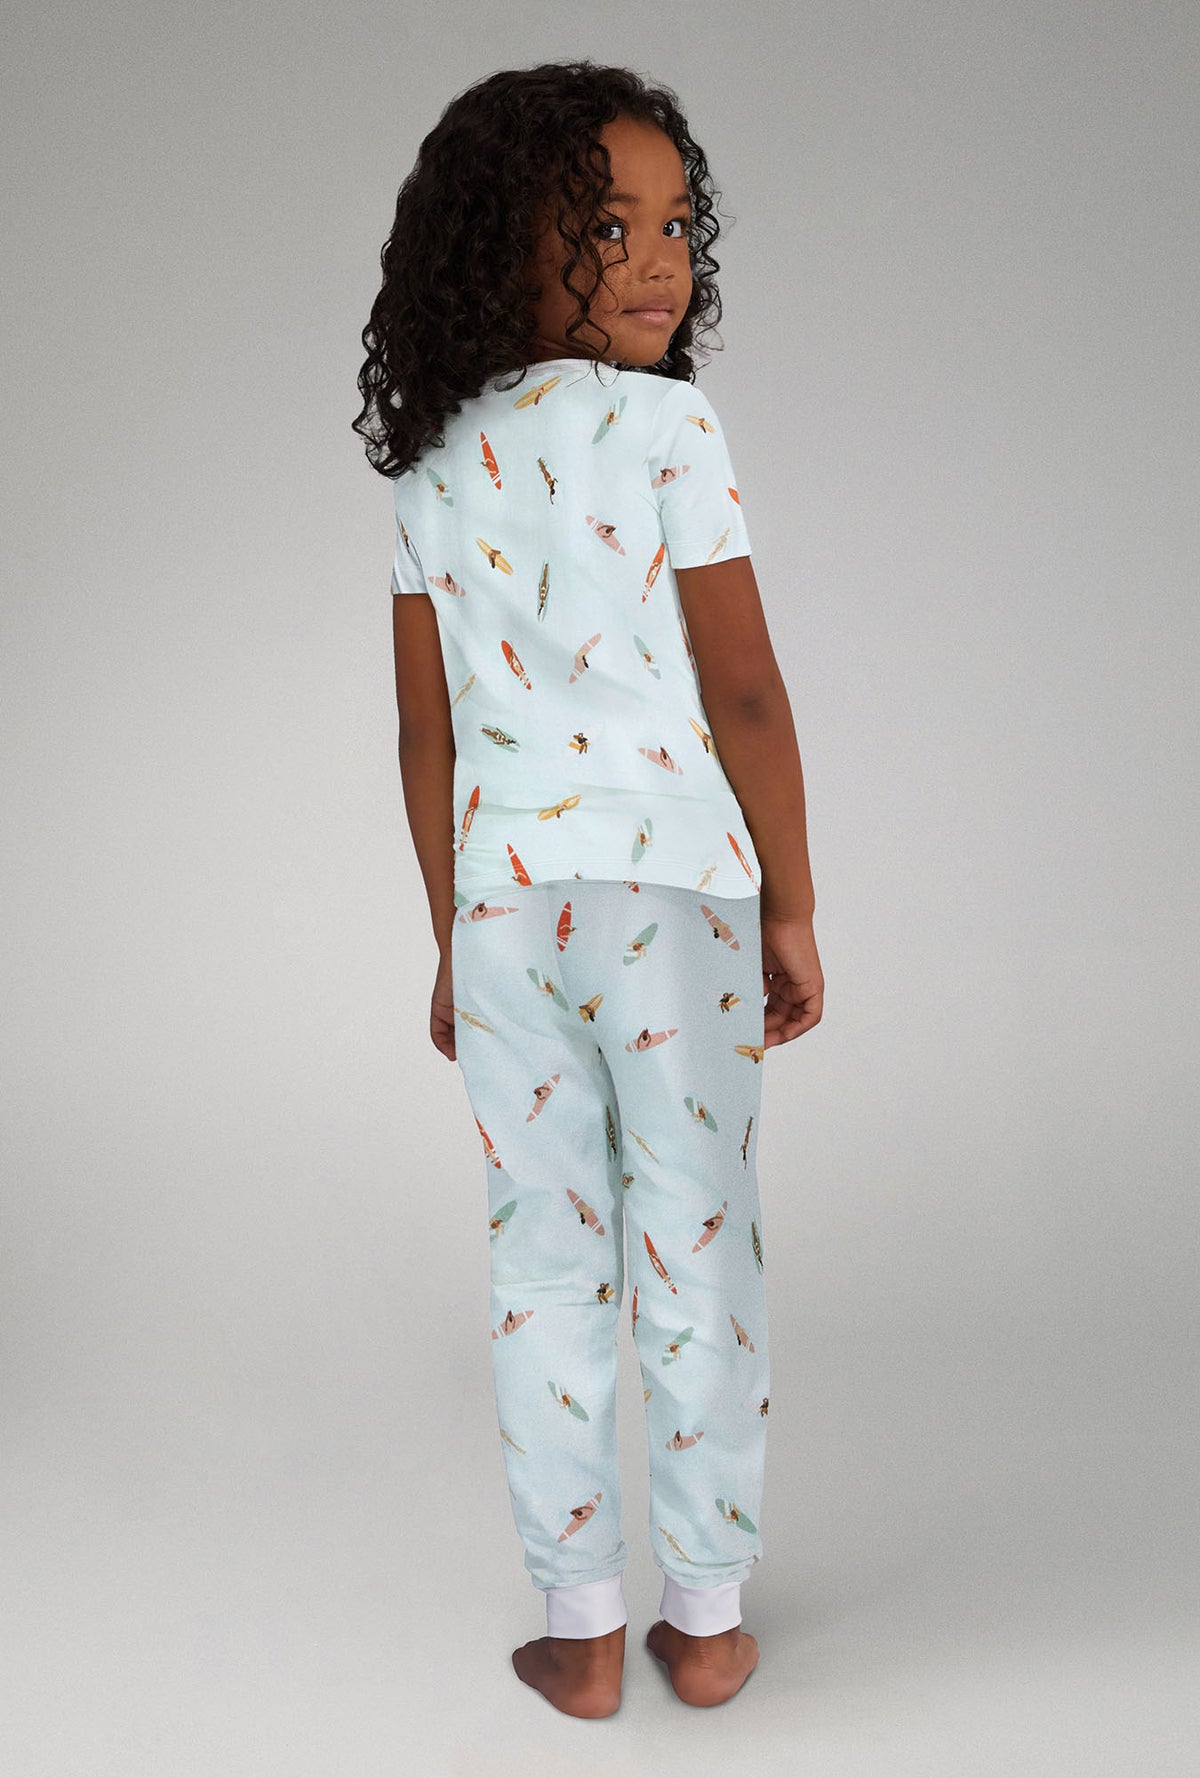 A girl wearing white short sleeve stretch jersey pj set with retro surf print.